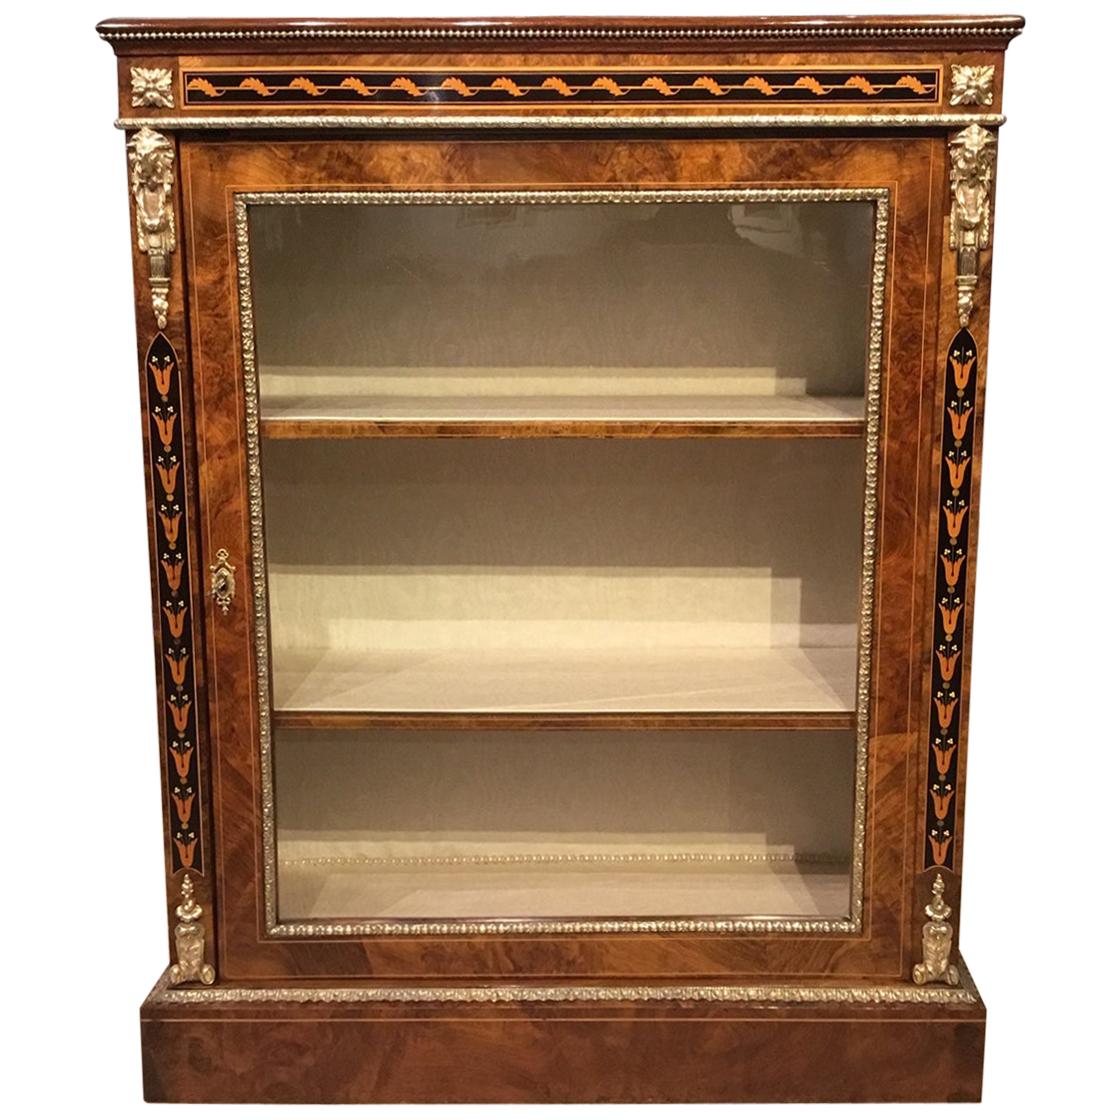 Fine Quality Burr Walnut and Marquetry Inlaid Victorian Period Pier Cabinet For Sale